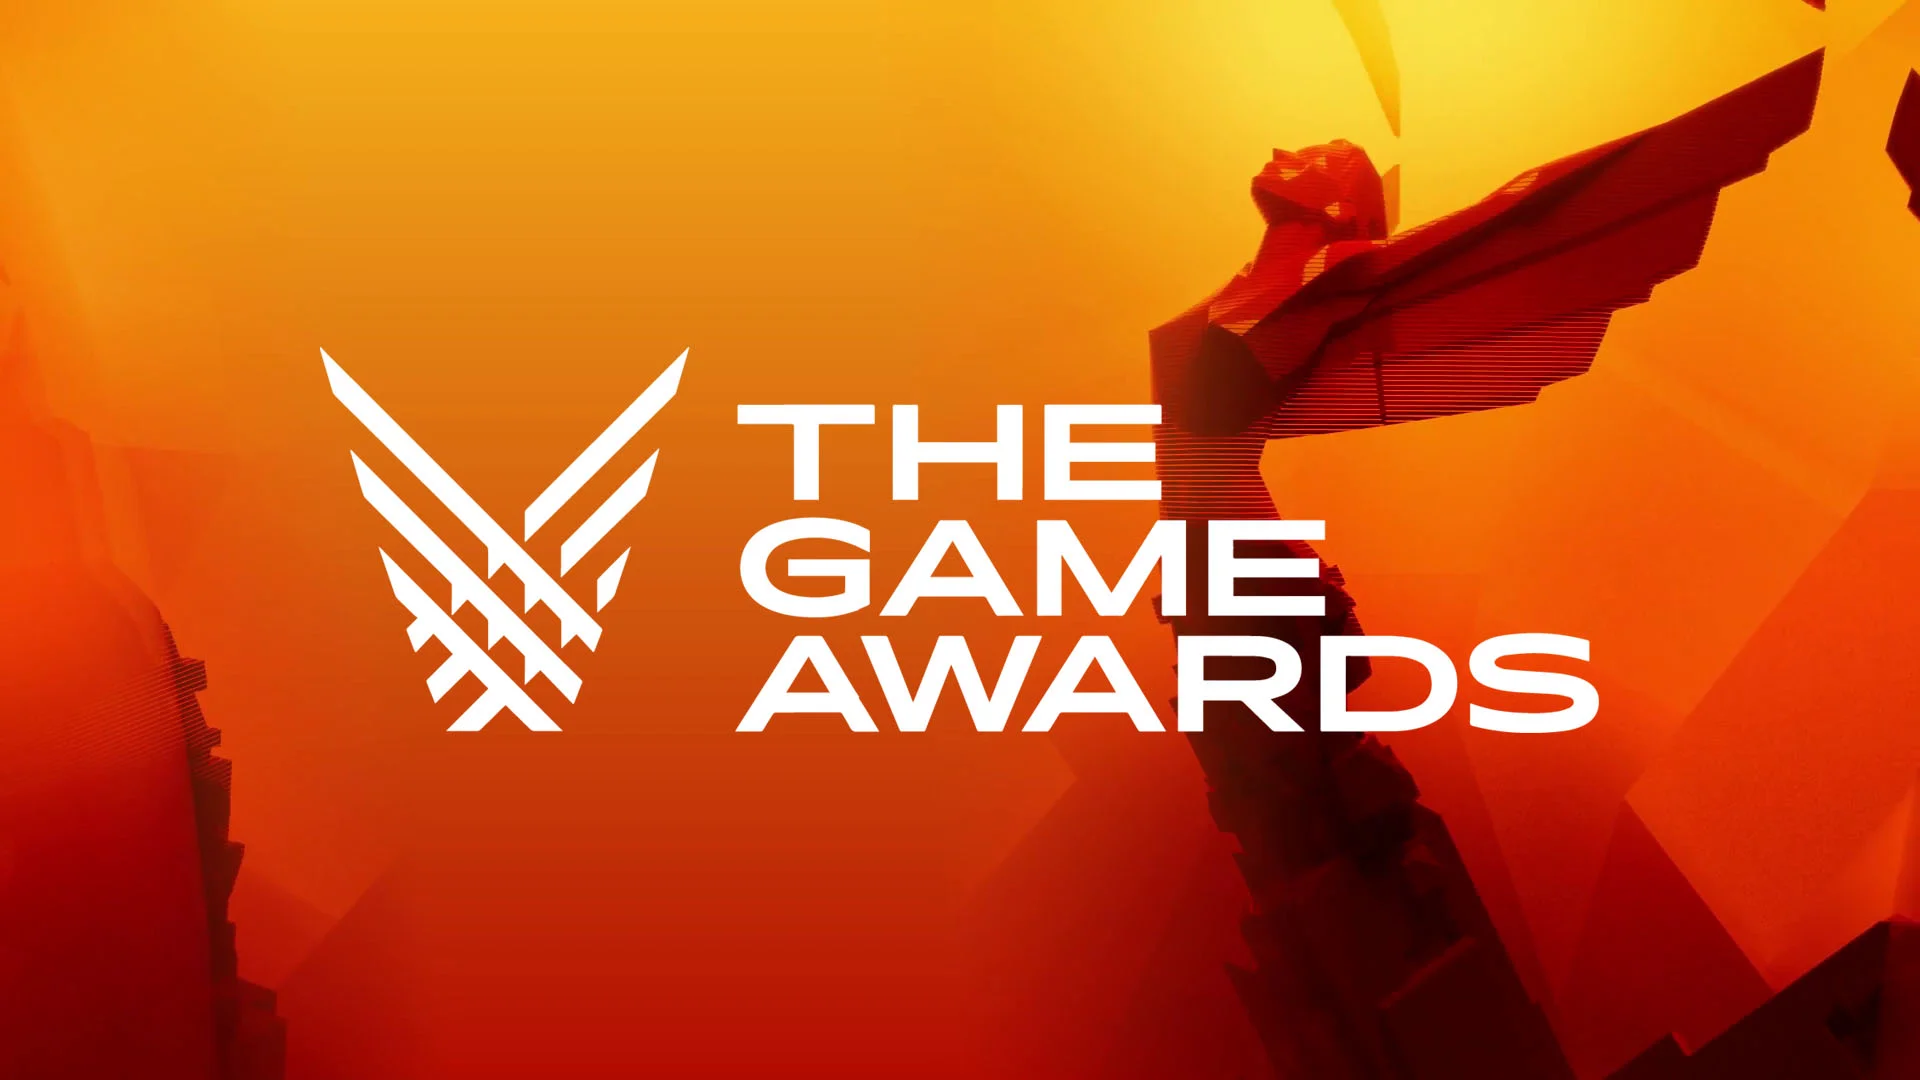 The Game Awards on X: Just 3 hours remain in #TheGameAwards